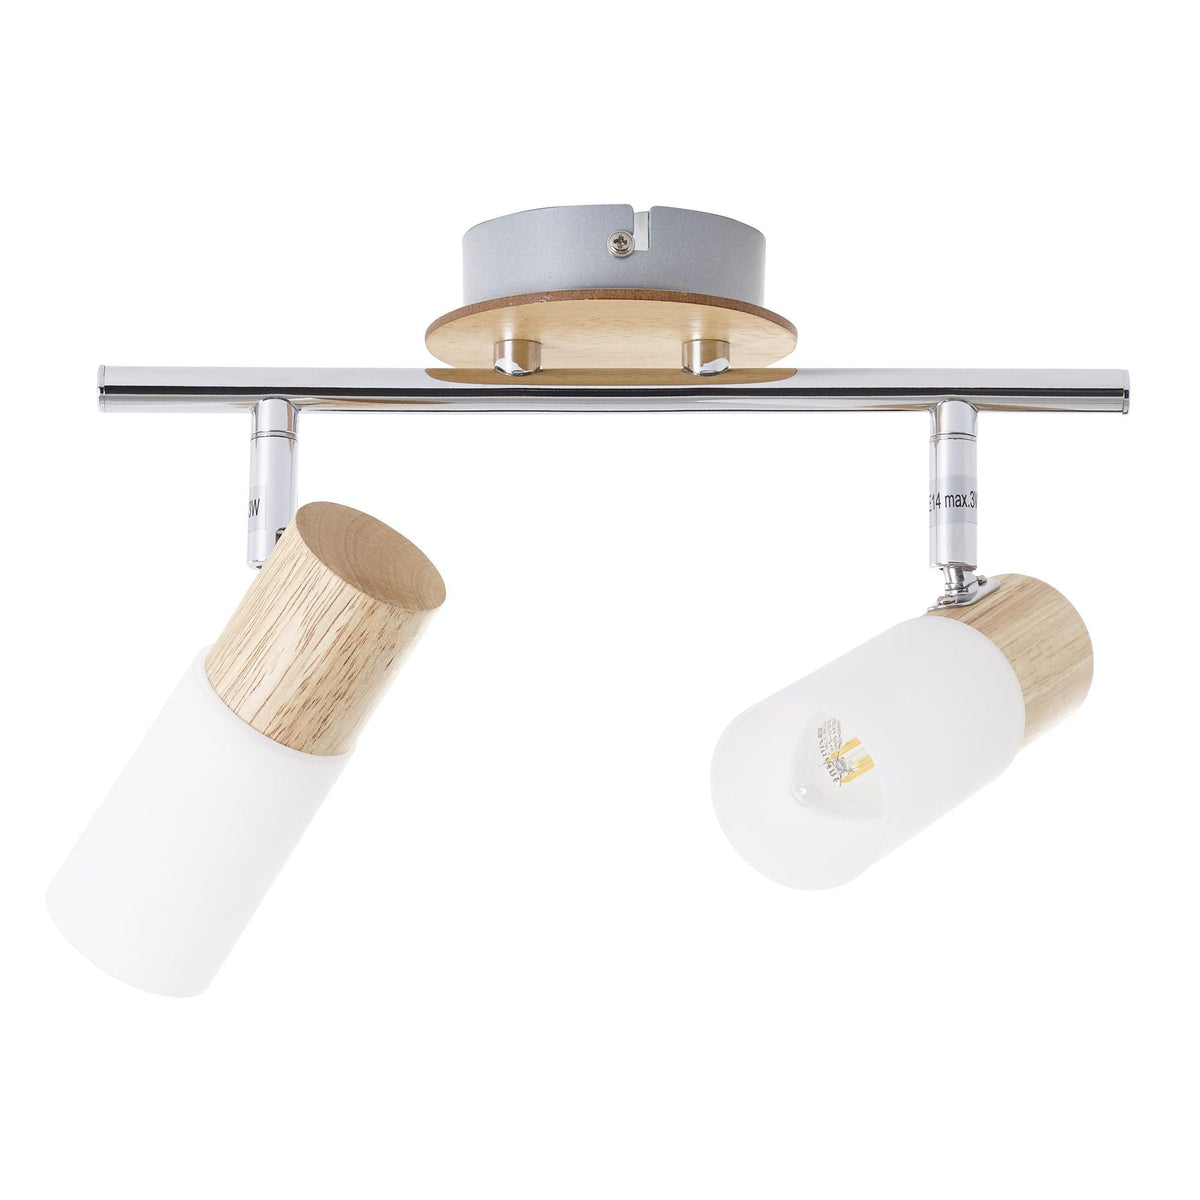 Brilliant 2 Light 7W Babsan Spotlight - Wood Light &amp; White | 51413/50 from DID Electrical - guaranteed Irish, guaranteed quality service. (6977595408572)